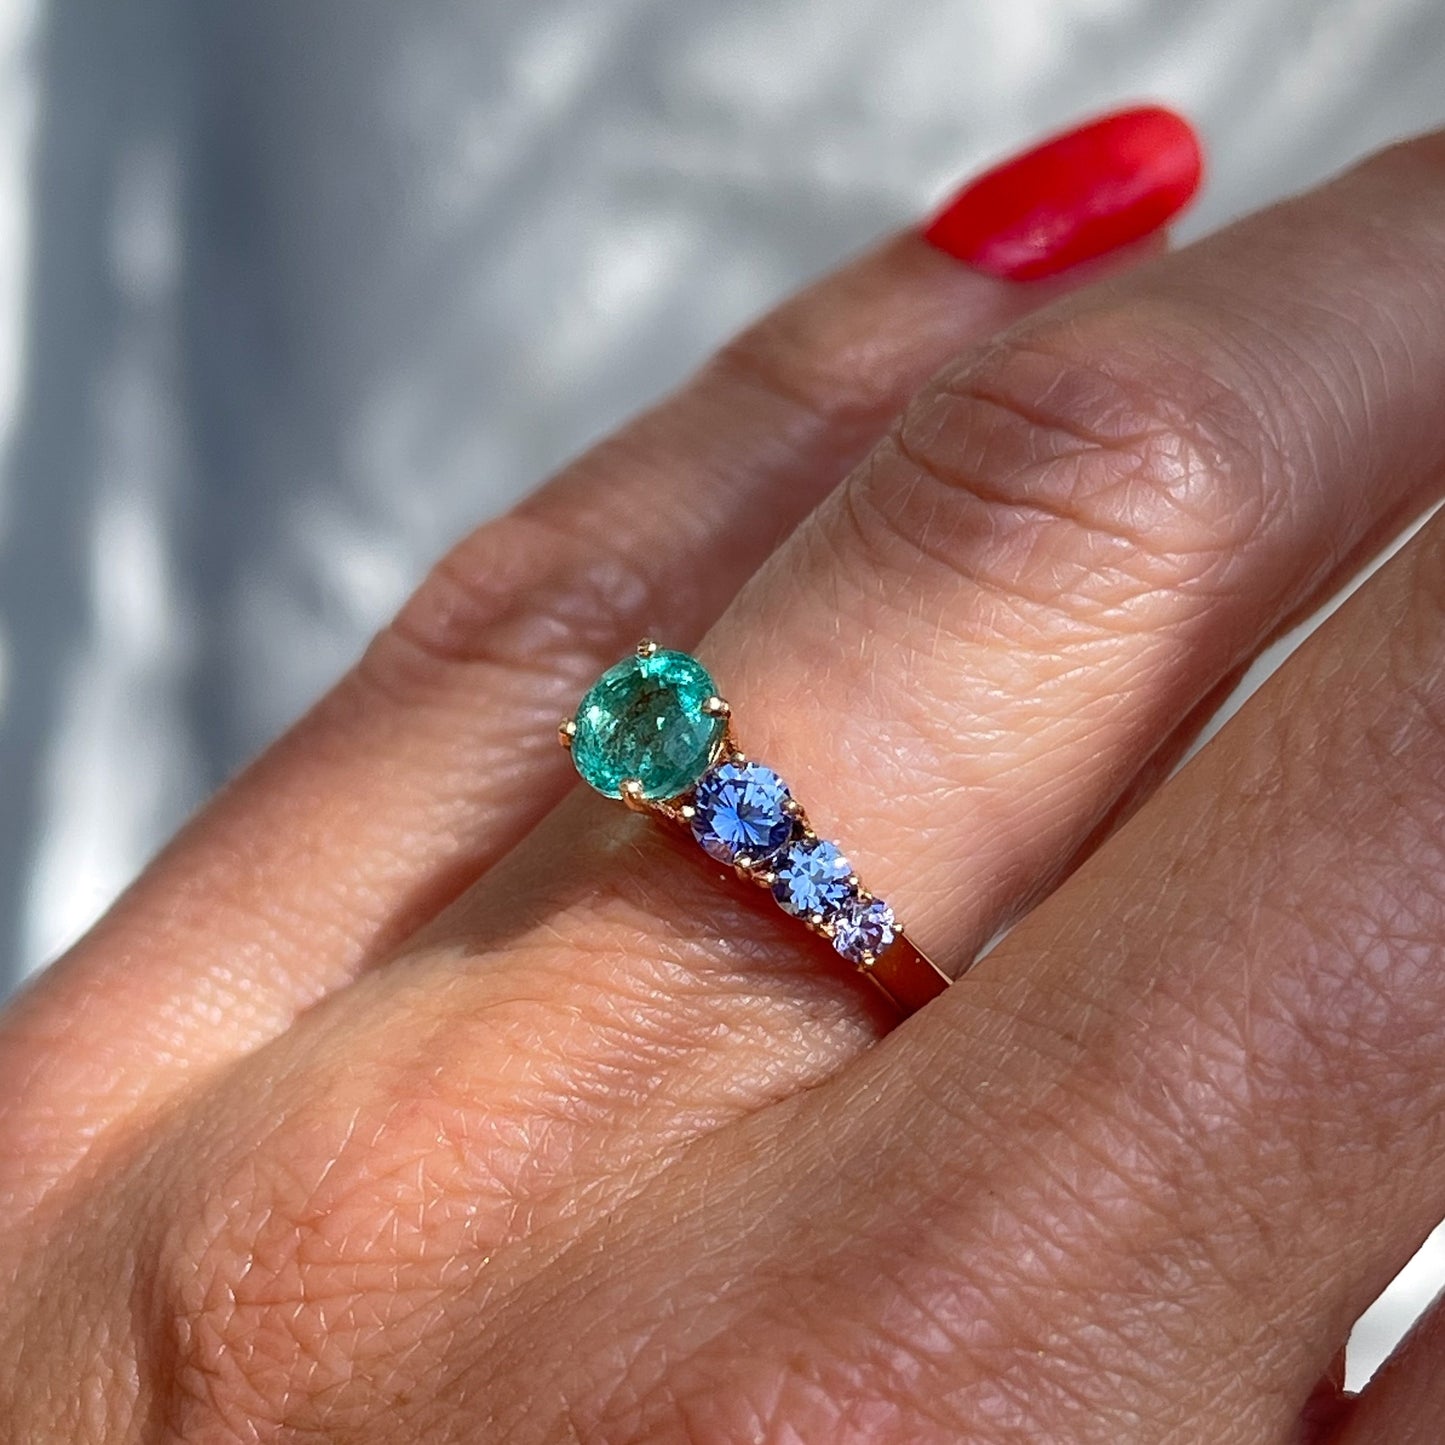 A Colombian Emerald Ring by NIXIN Jewelry modeled on the hand. The sapphire and emerald ring is 14k rose gold and makes a beautiful emerald engagement ring.